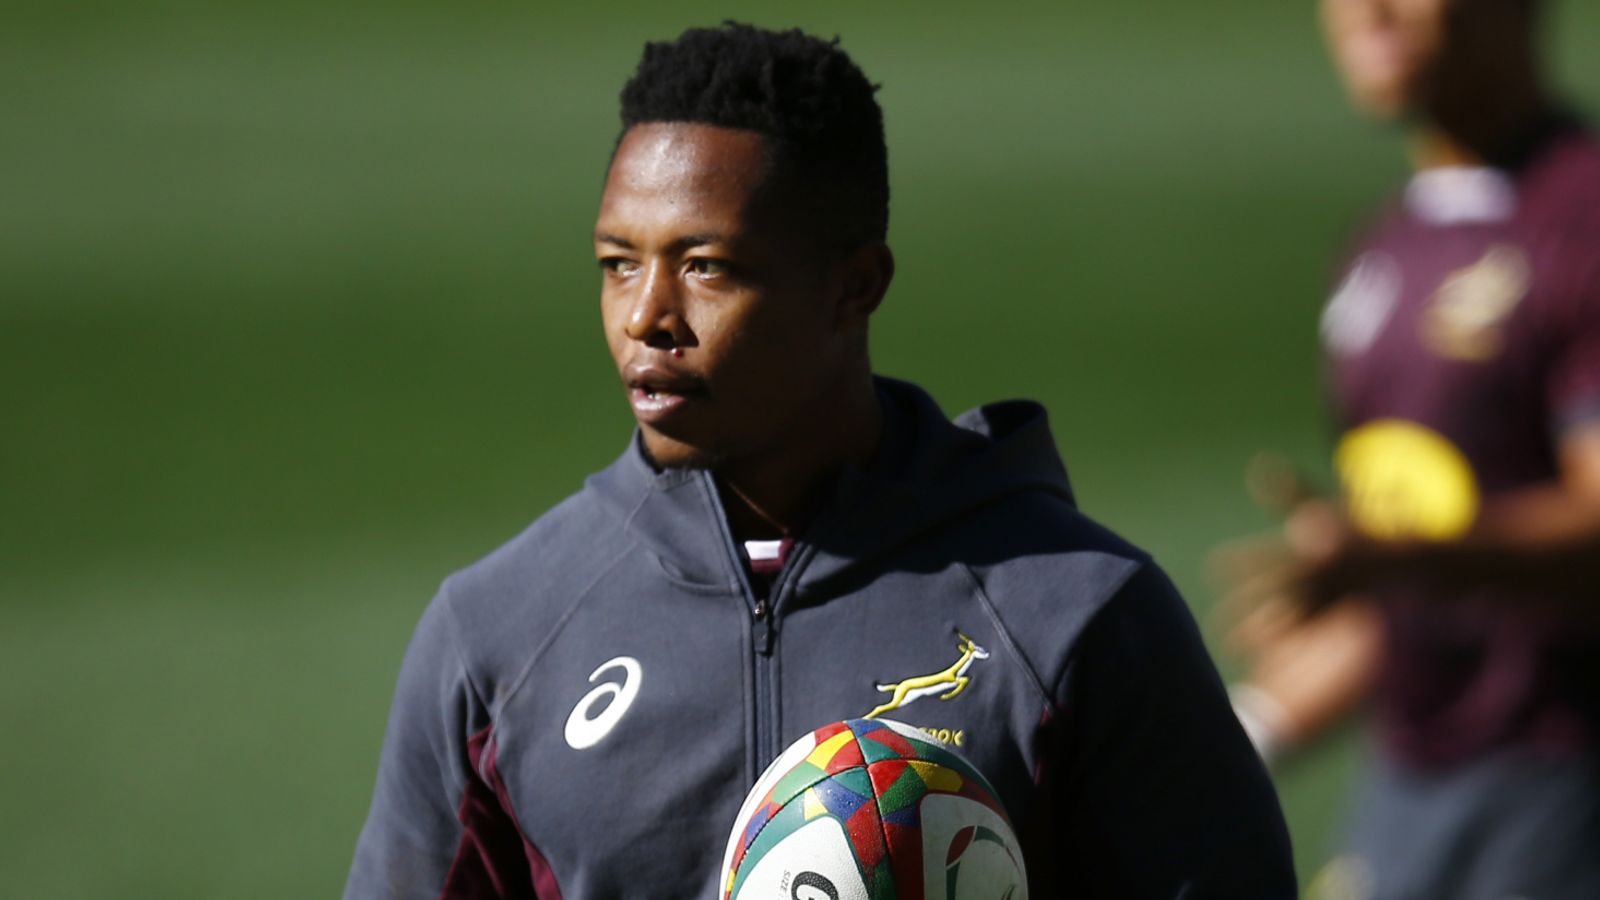 Sbu Nkosi: South Africa winger found 'safe and sound', opens up on rugby 'pressure'